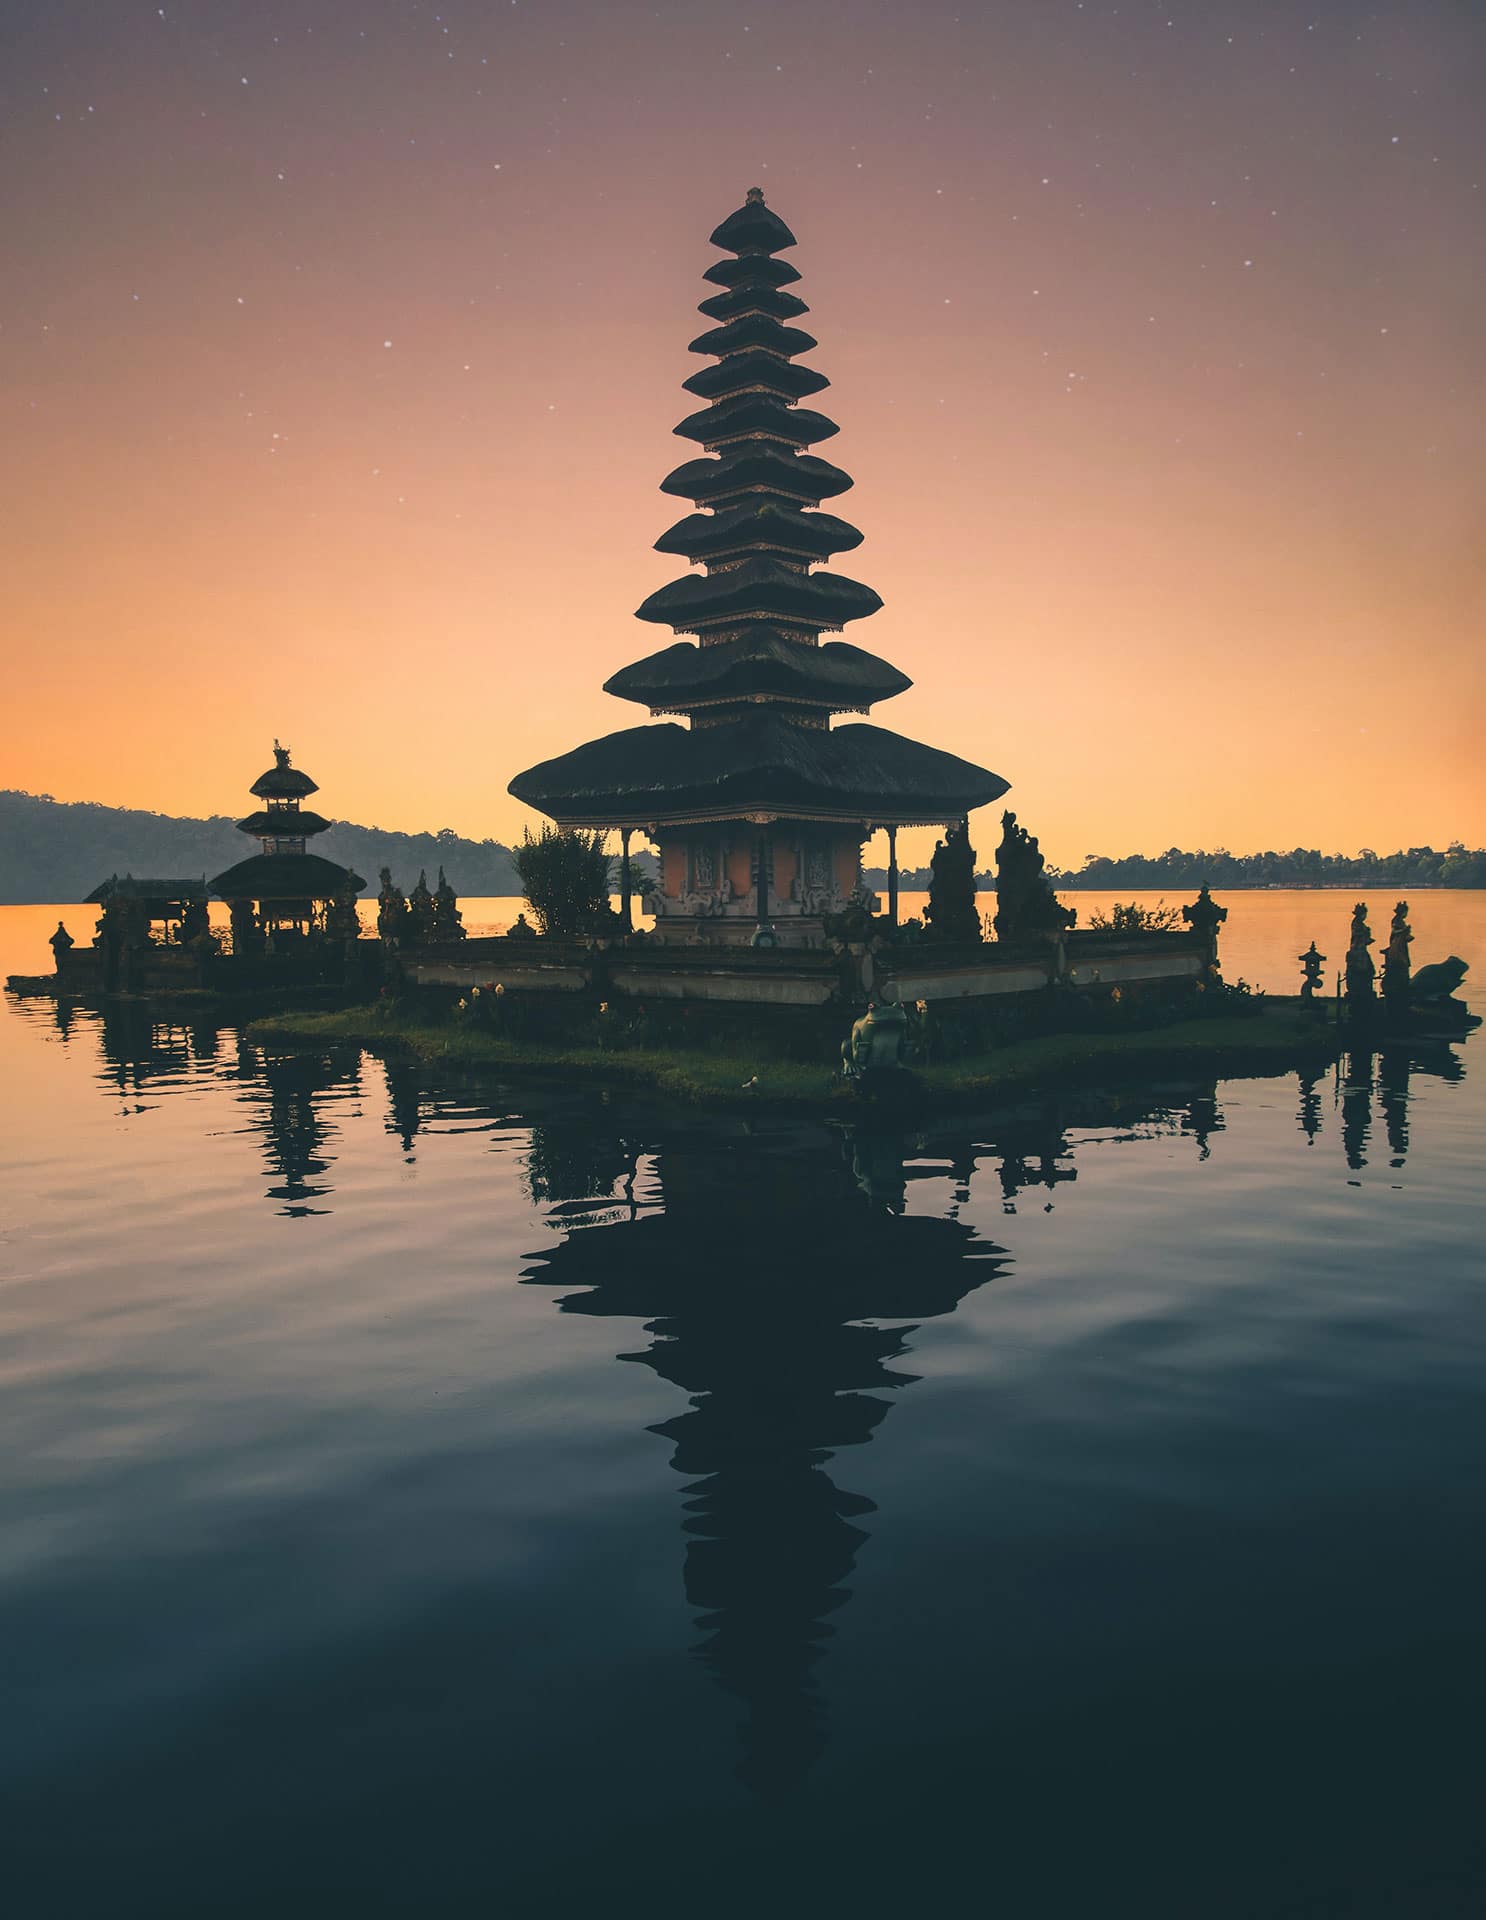 Sunset behind a temple in Indonesia